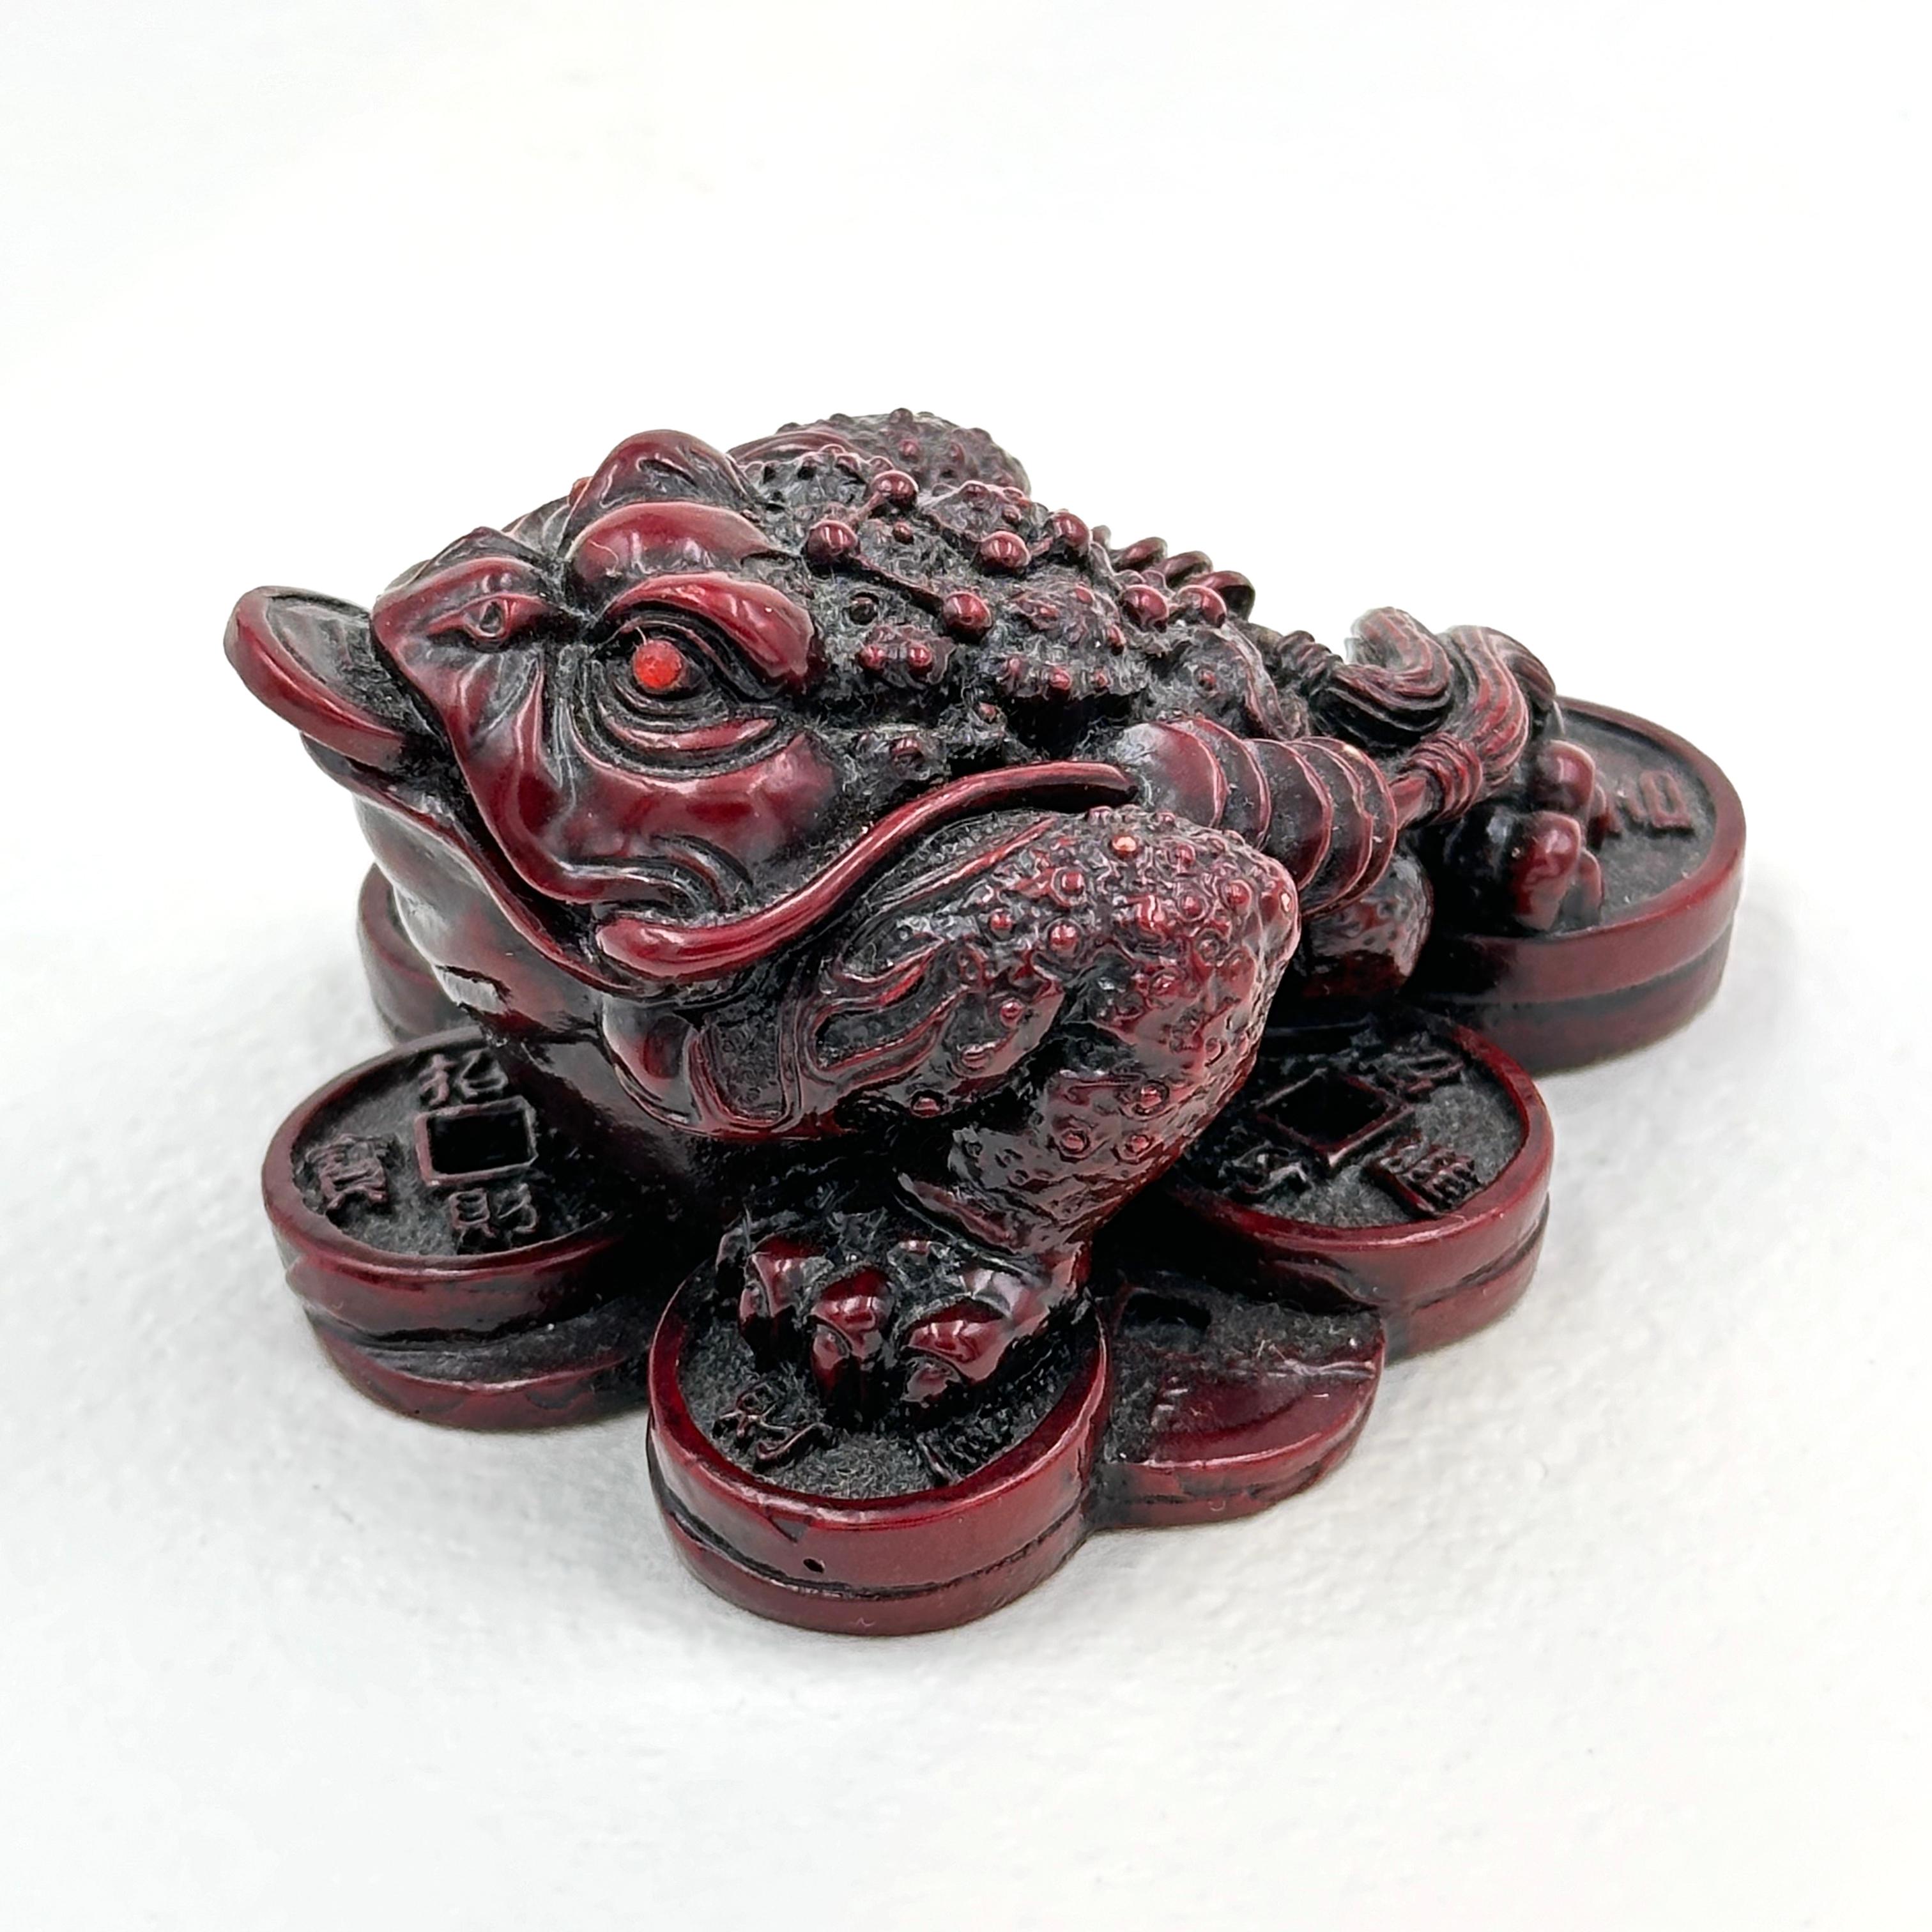 Feng Shui Good Luck Money Toad

20th century
Red resin
1.5 x 3 x 2.5 inches